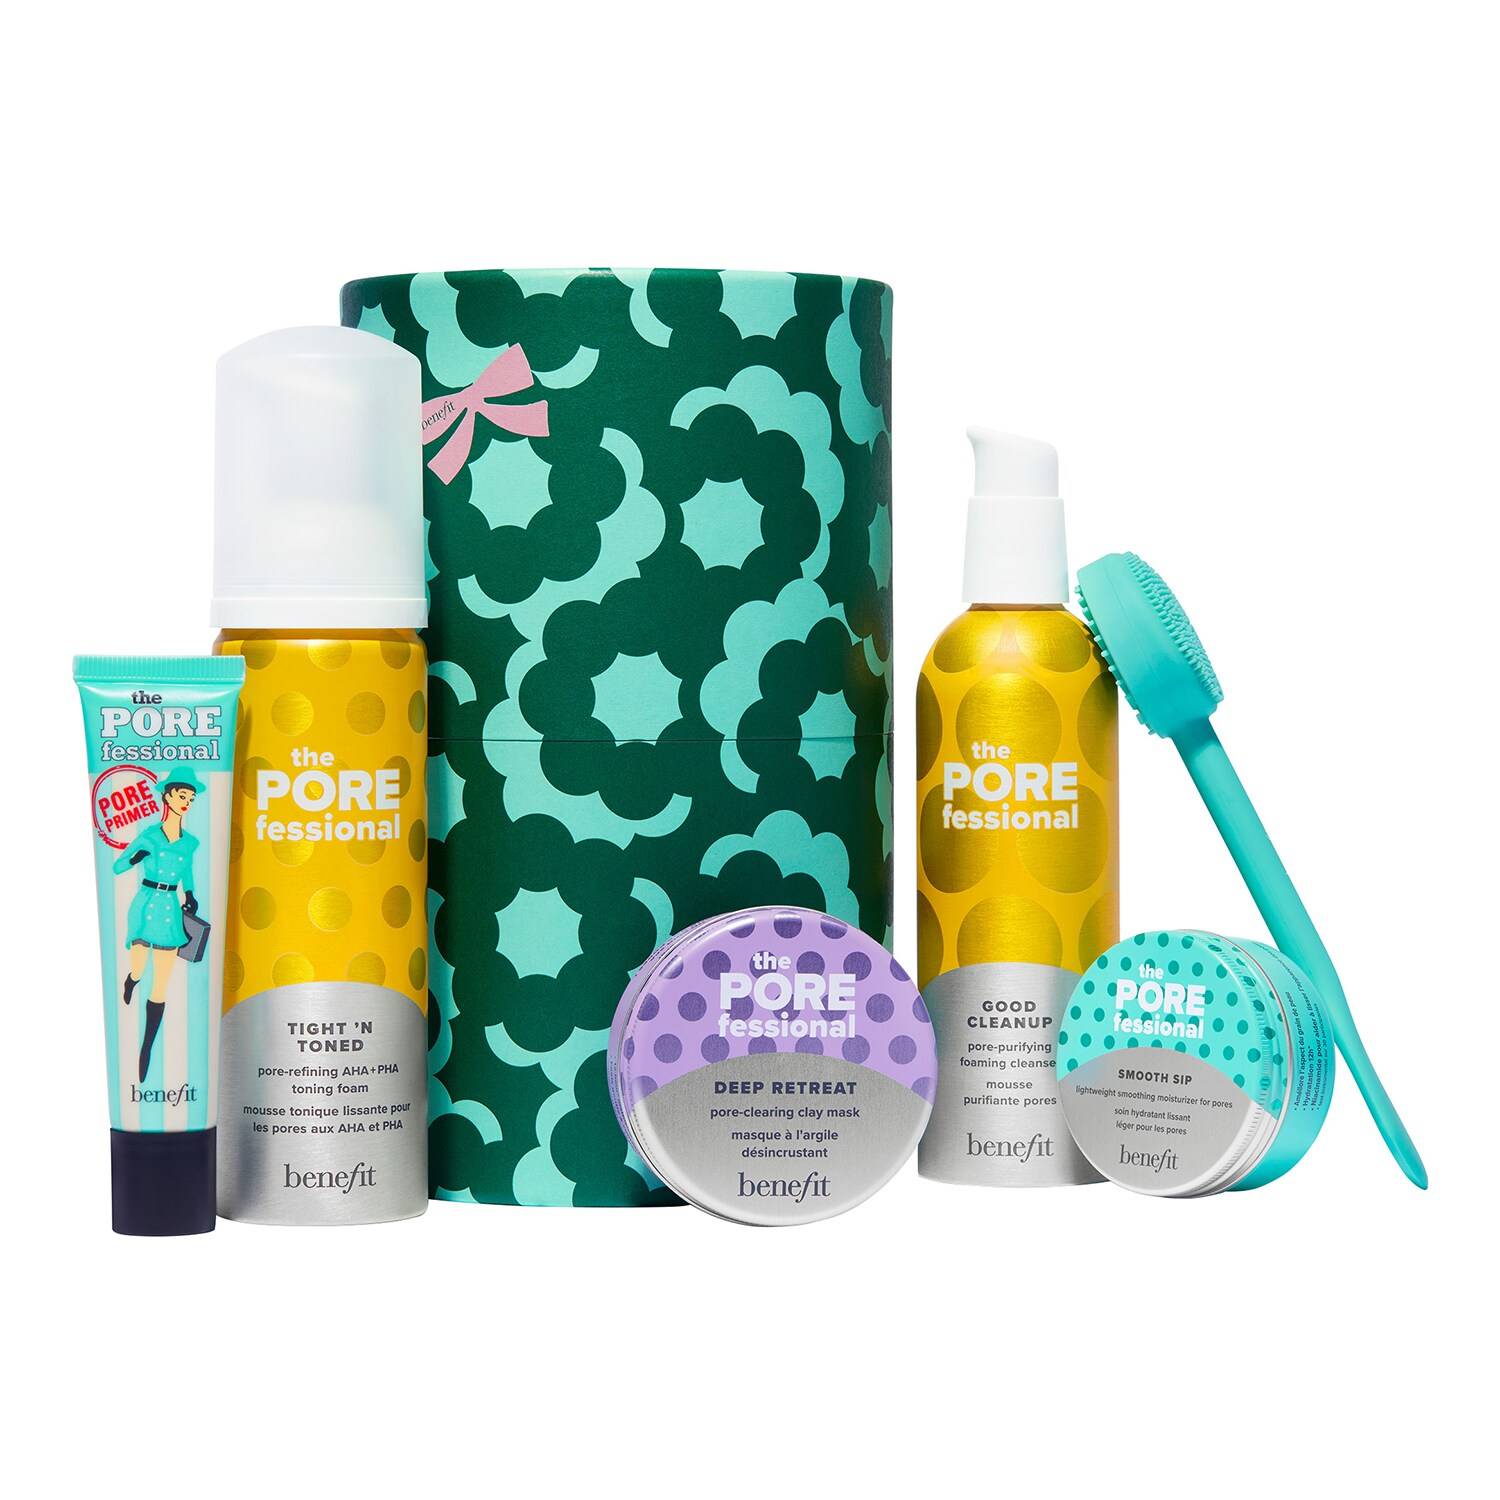 BENEFIT COSMETICS The PORE the Merrier Gift Set